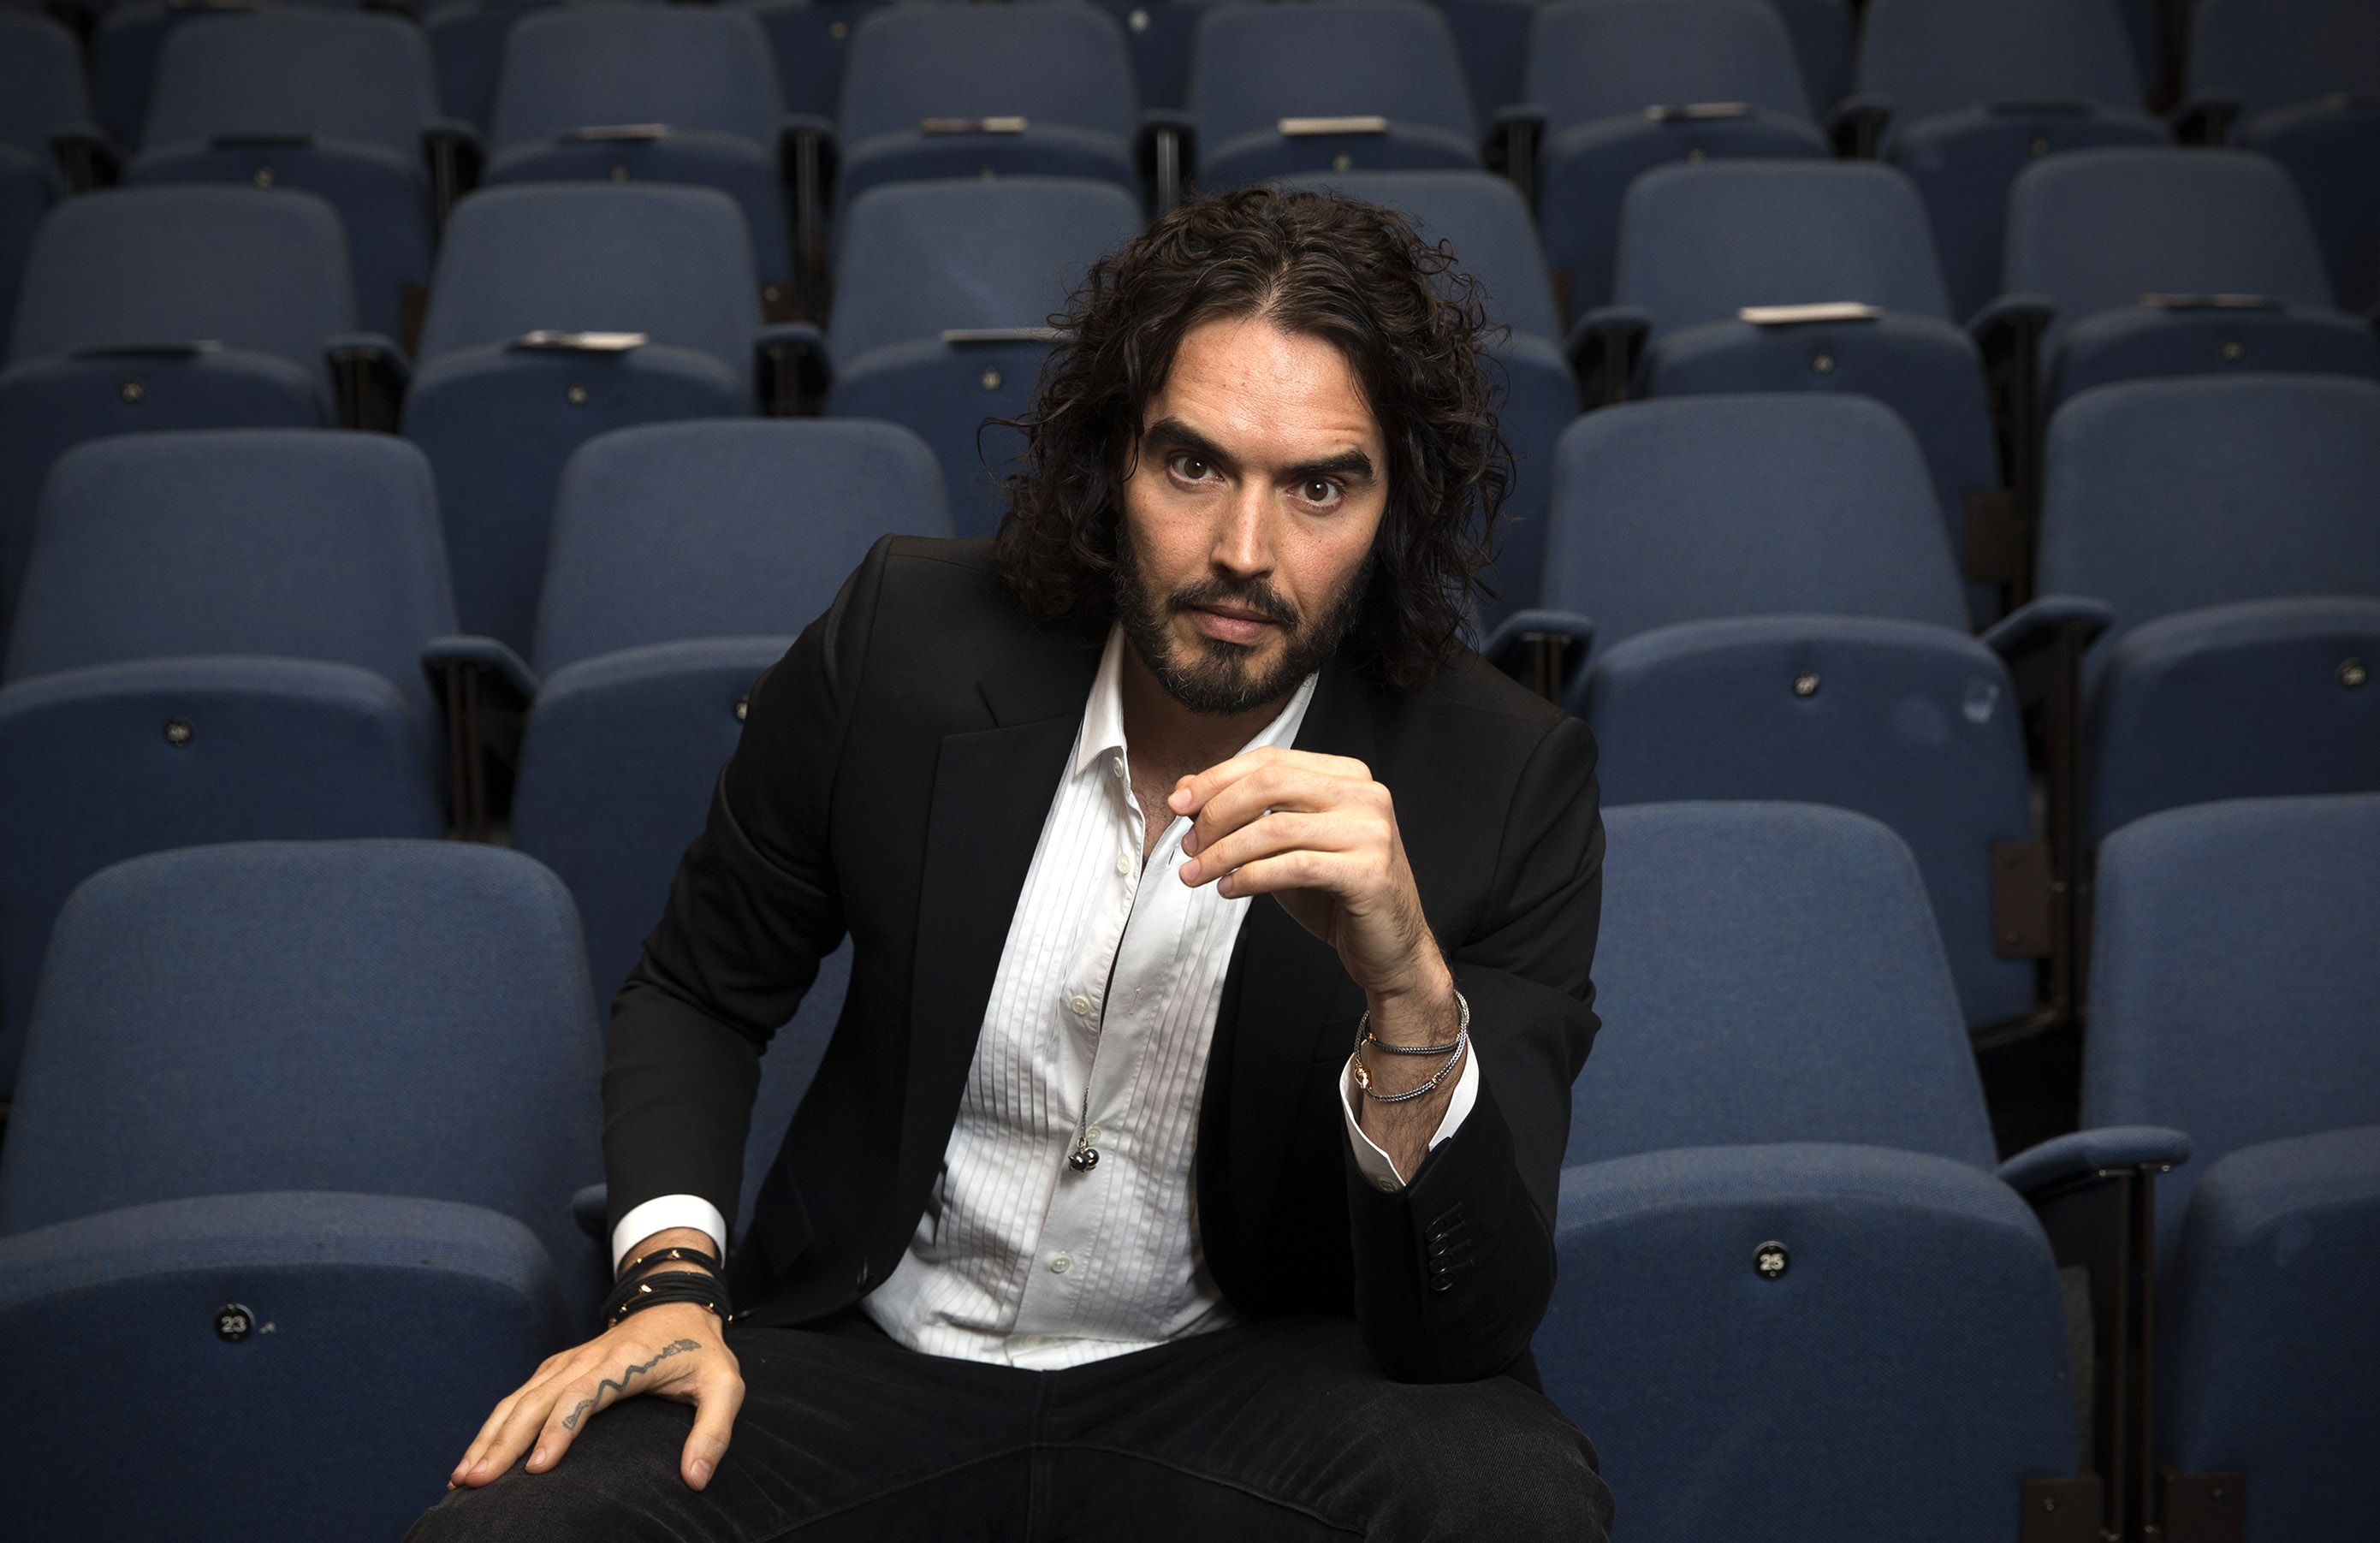 Russell Brand on Nov. 25, 2014 in London.